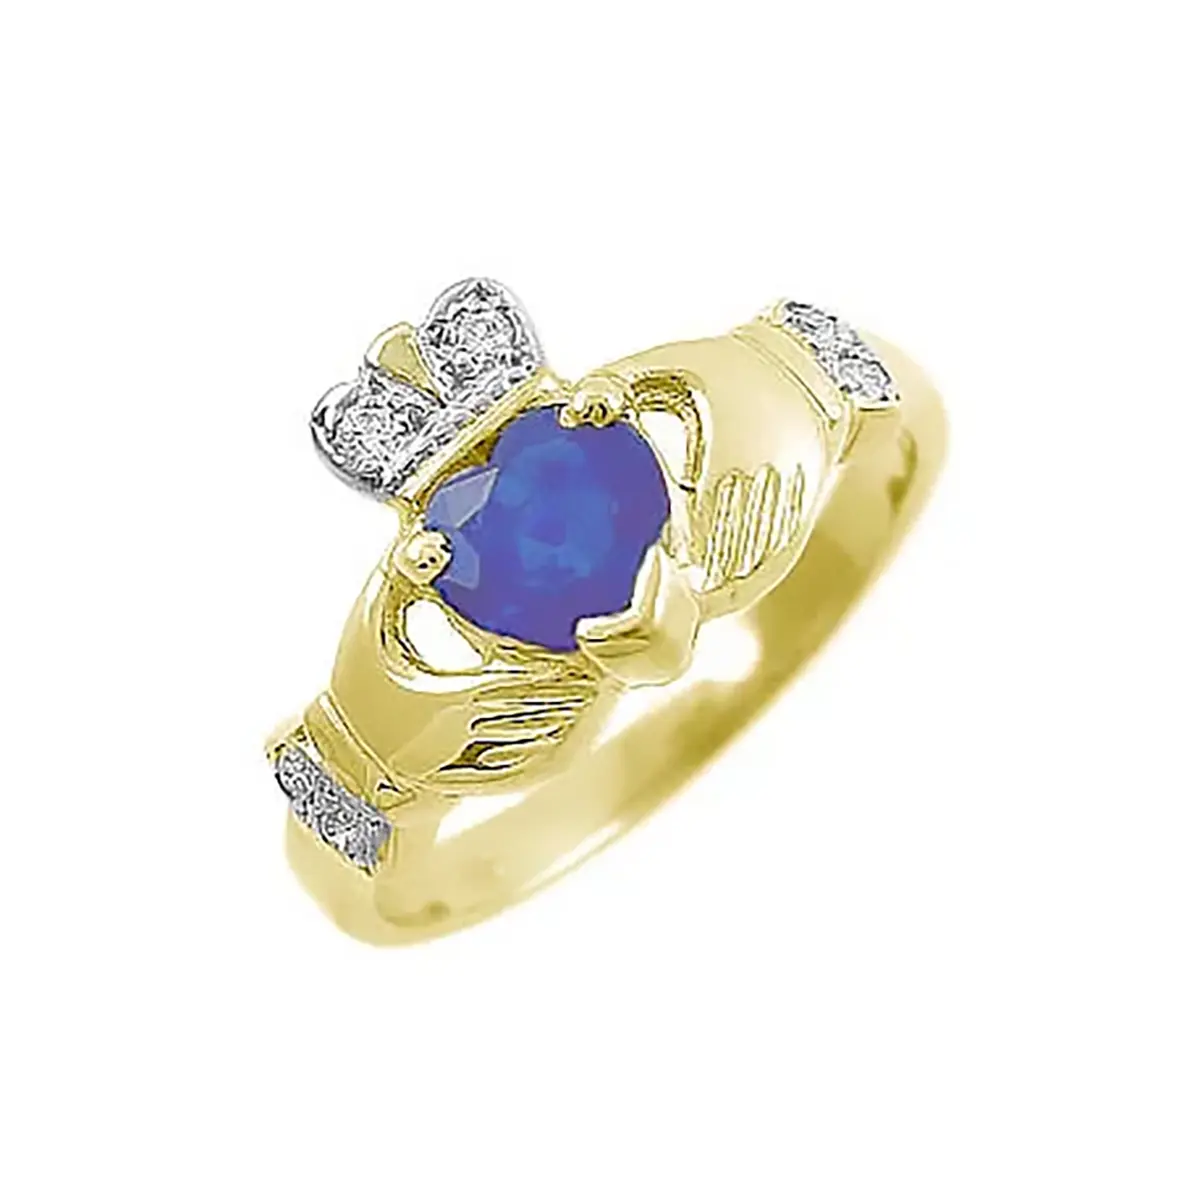 Gold And Sapphire Claddagh Ring With Brilliant Cut Diamond